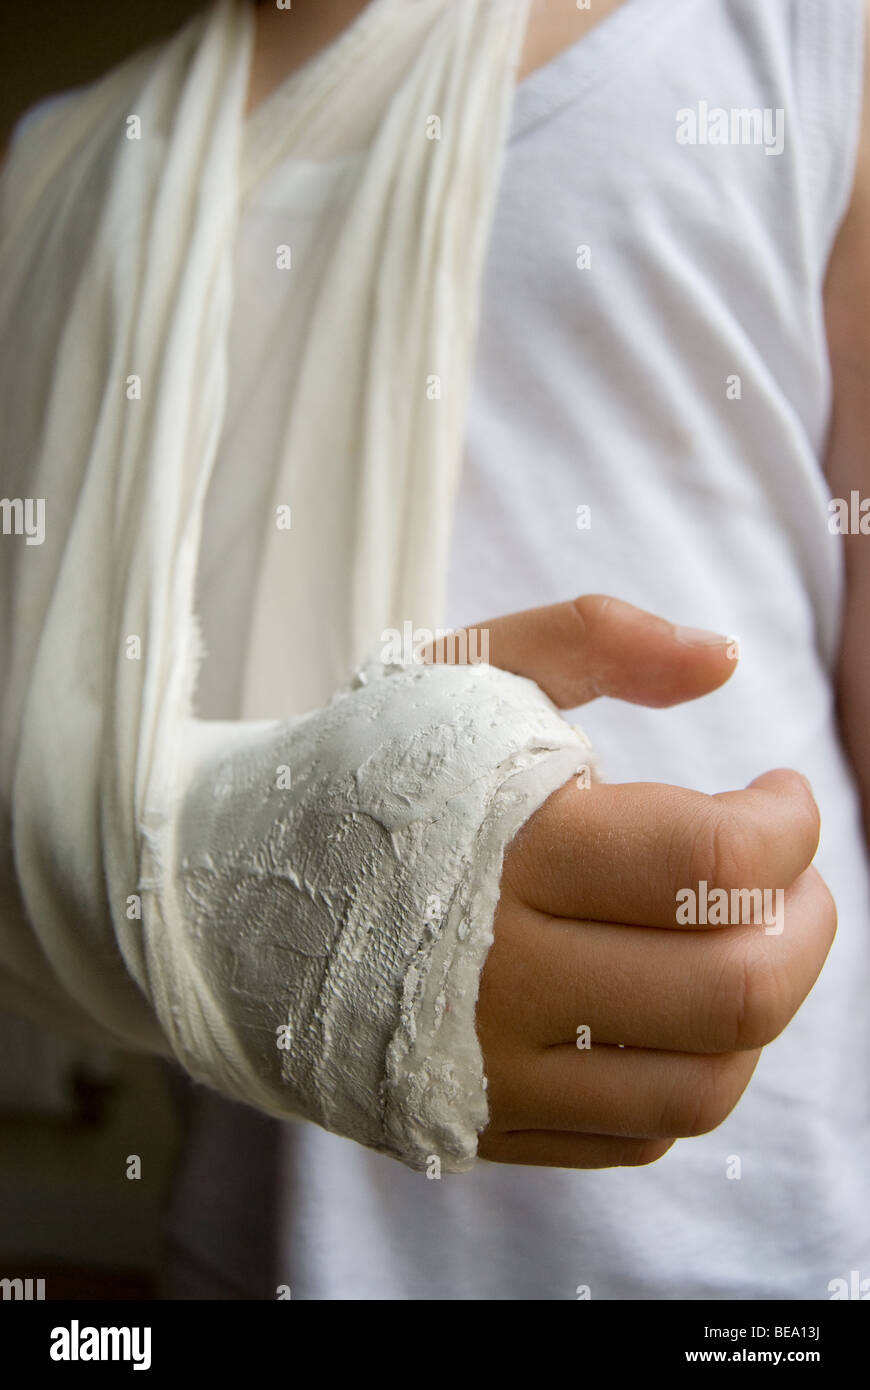 Child's arm in plaster and sling Stock Photo